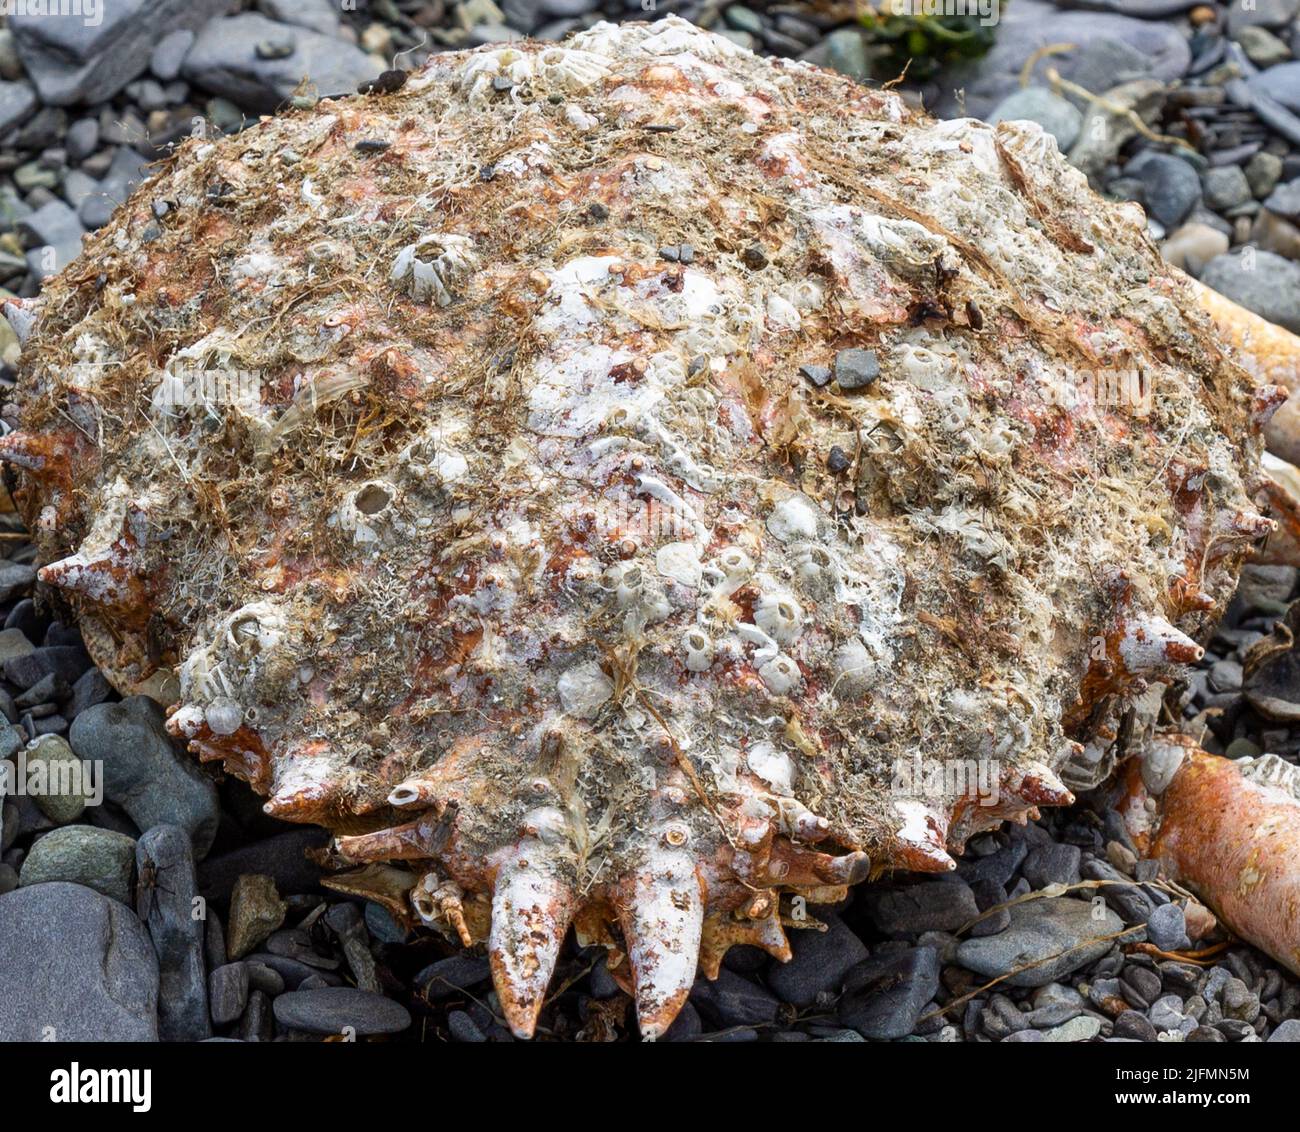 Empty Spider Crab shell close up covered in Barnacles Stock Photo